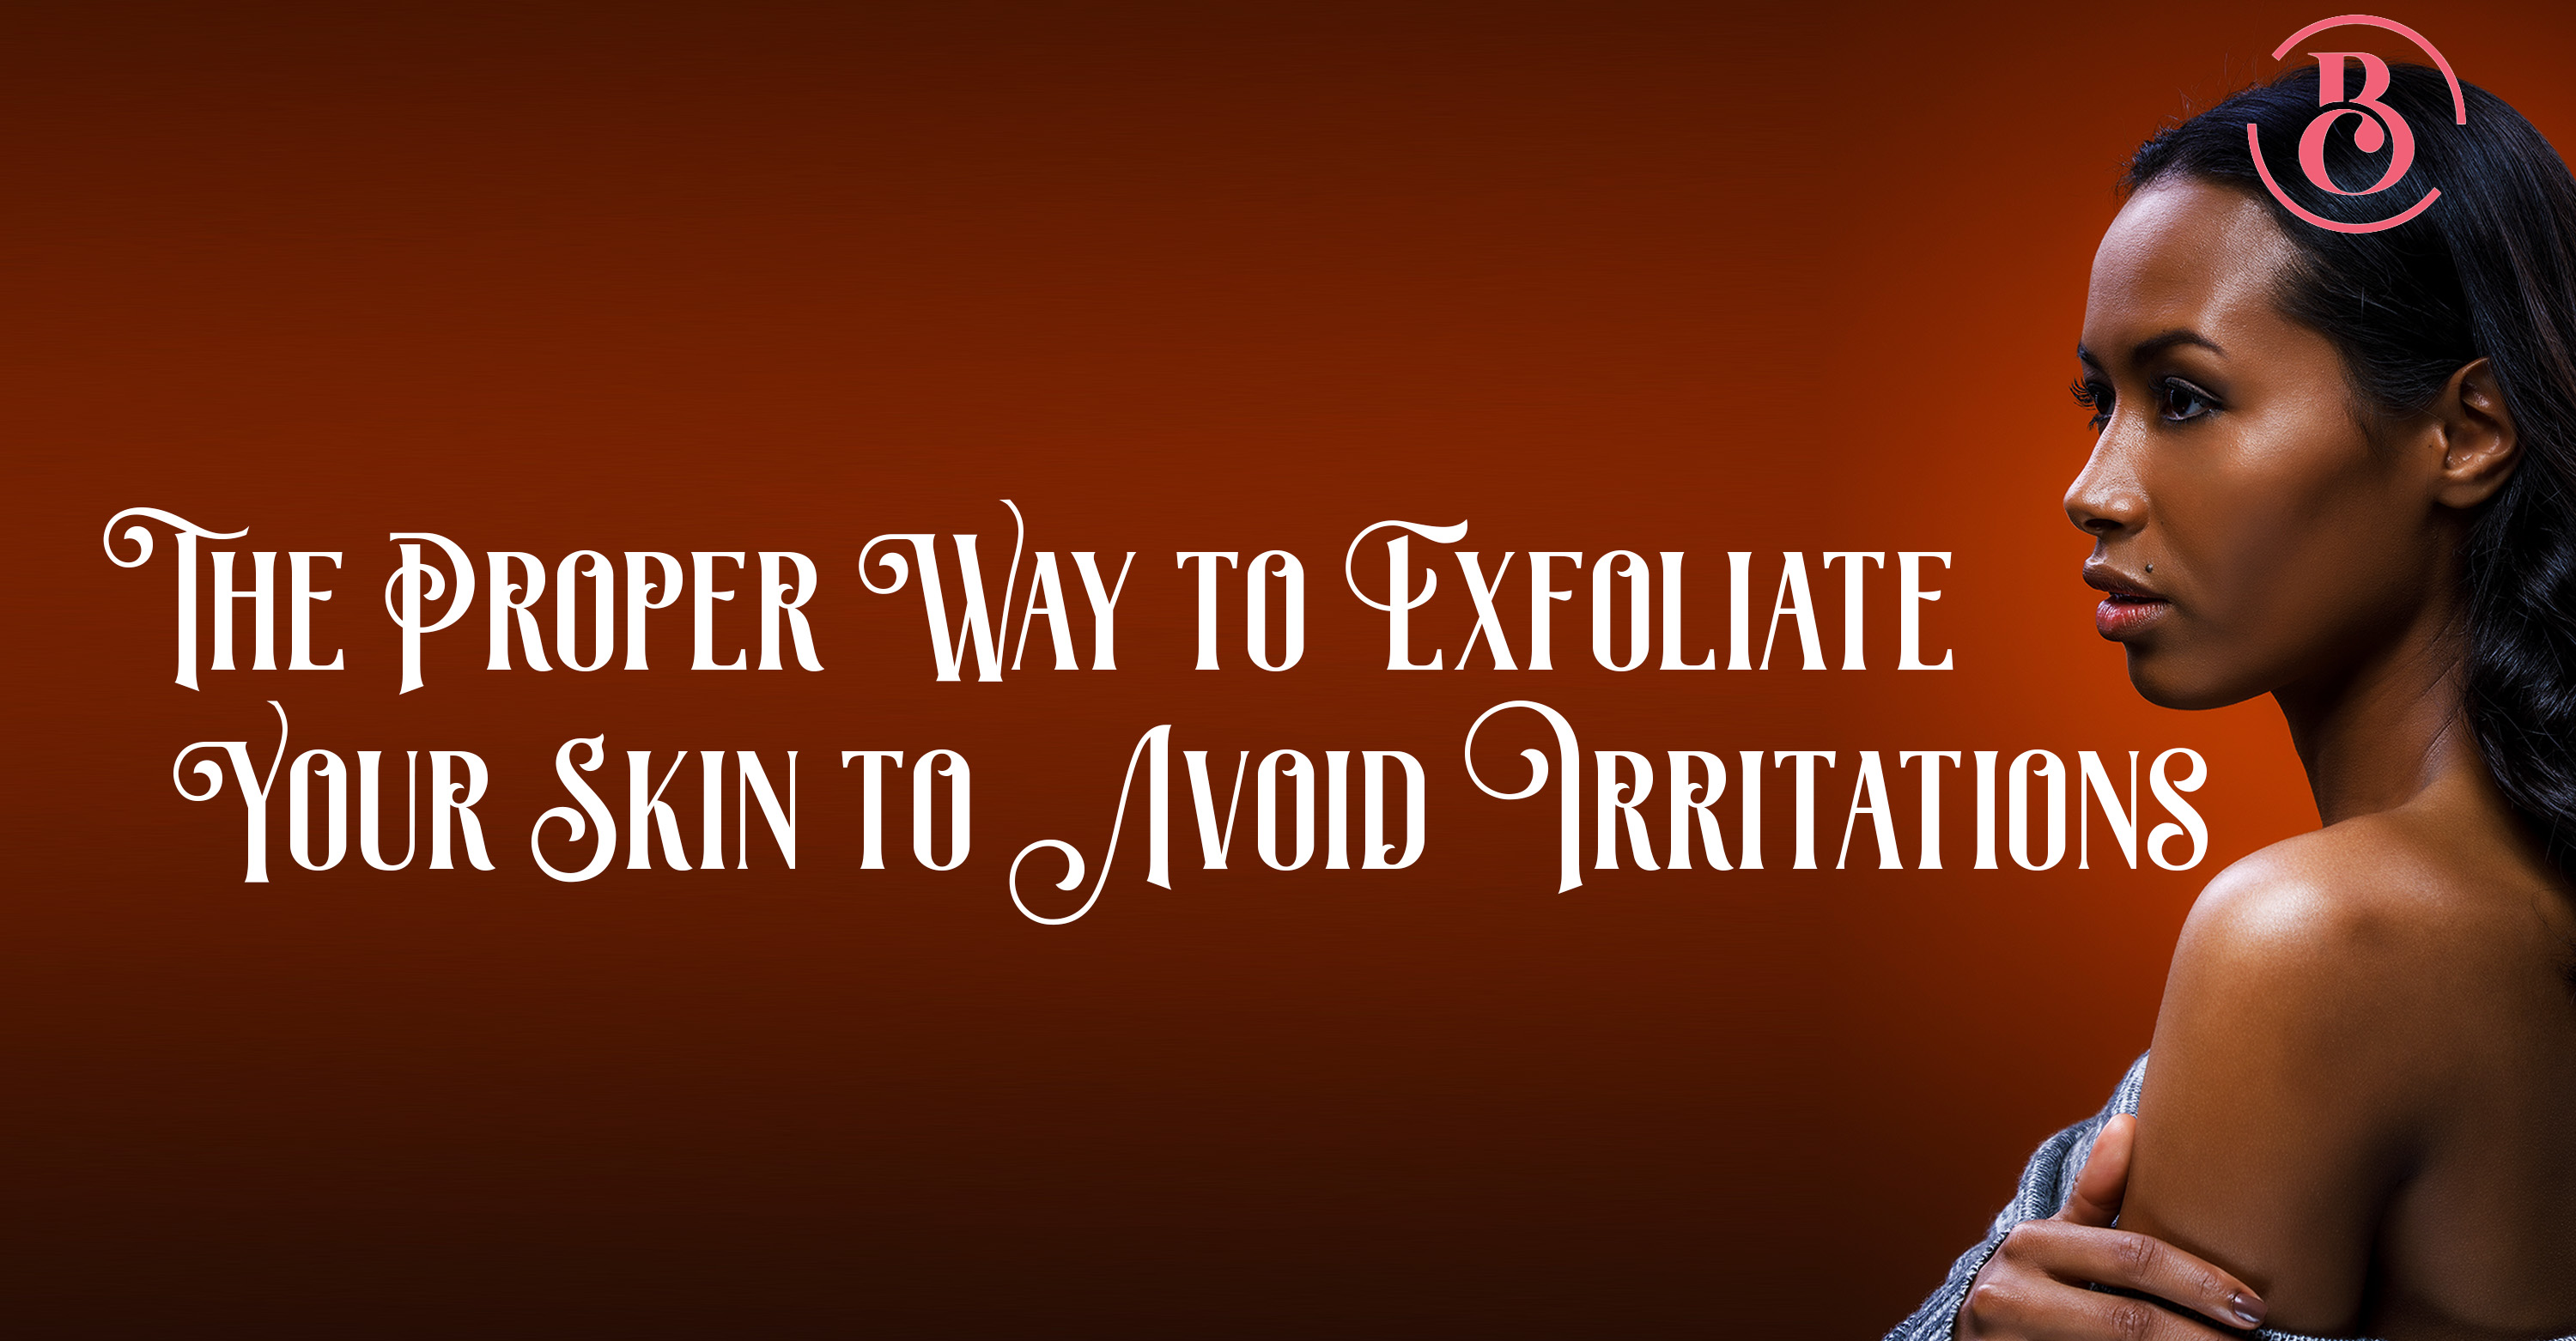 The Proper Way to Exfoliate Your Skin to Avoid Irritations